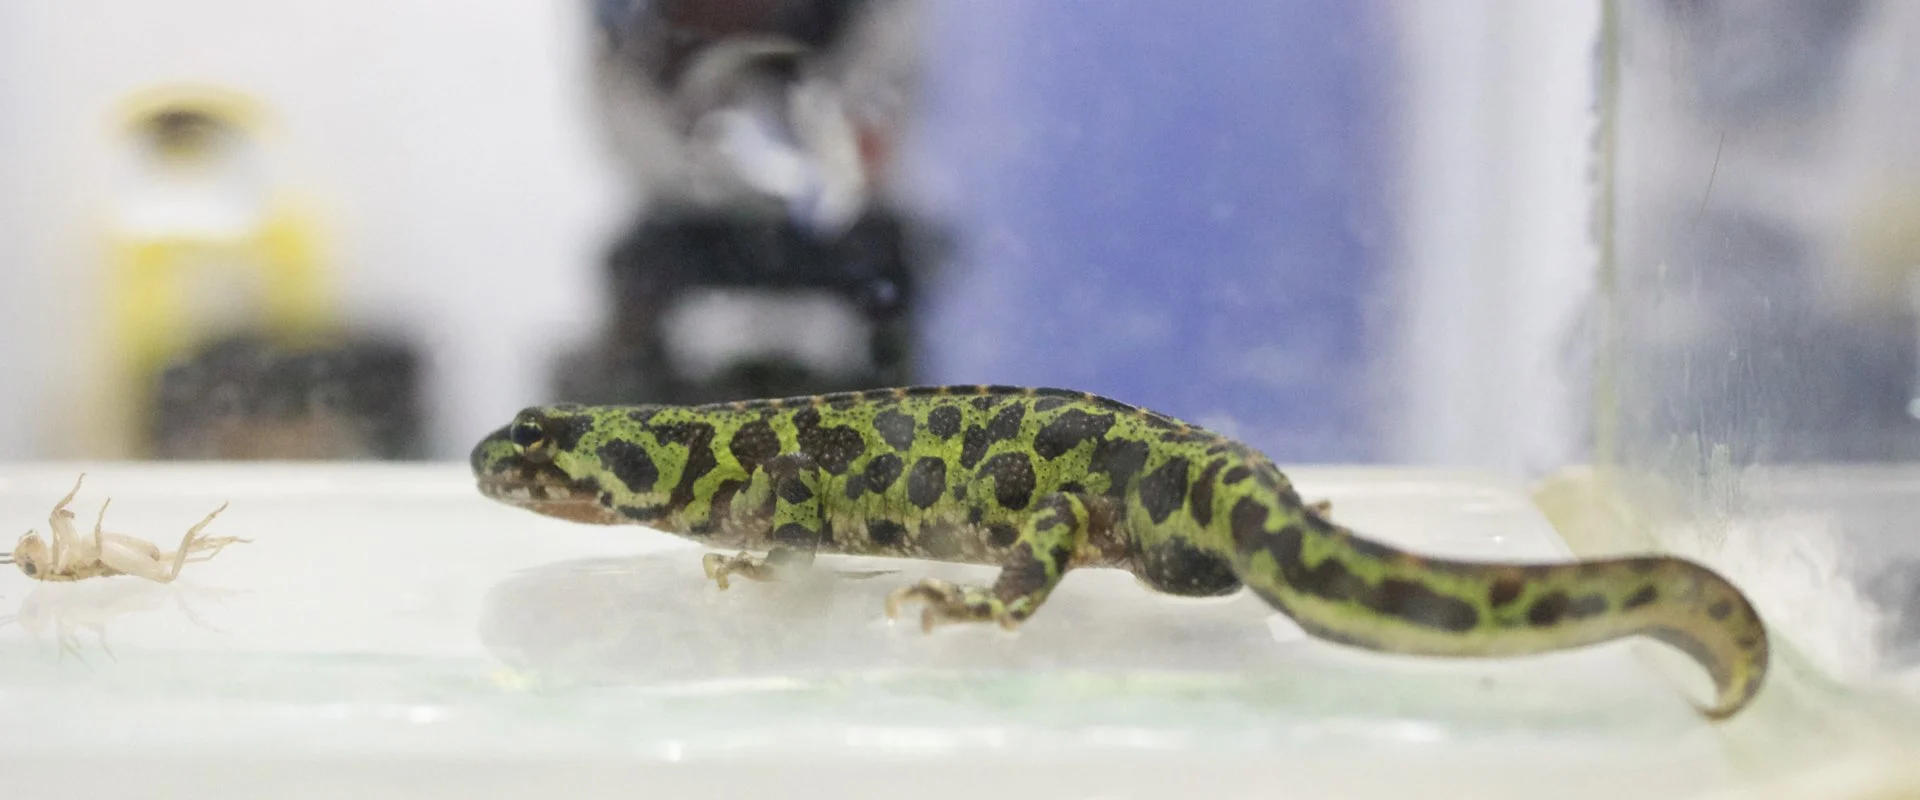 A salamander sitting in the bottom of a dry acrylic tank looking to the left and with an out of focus video camera in the background